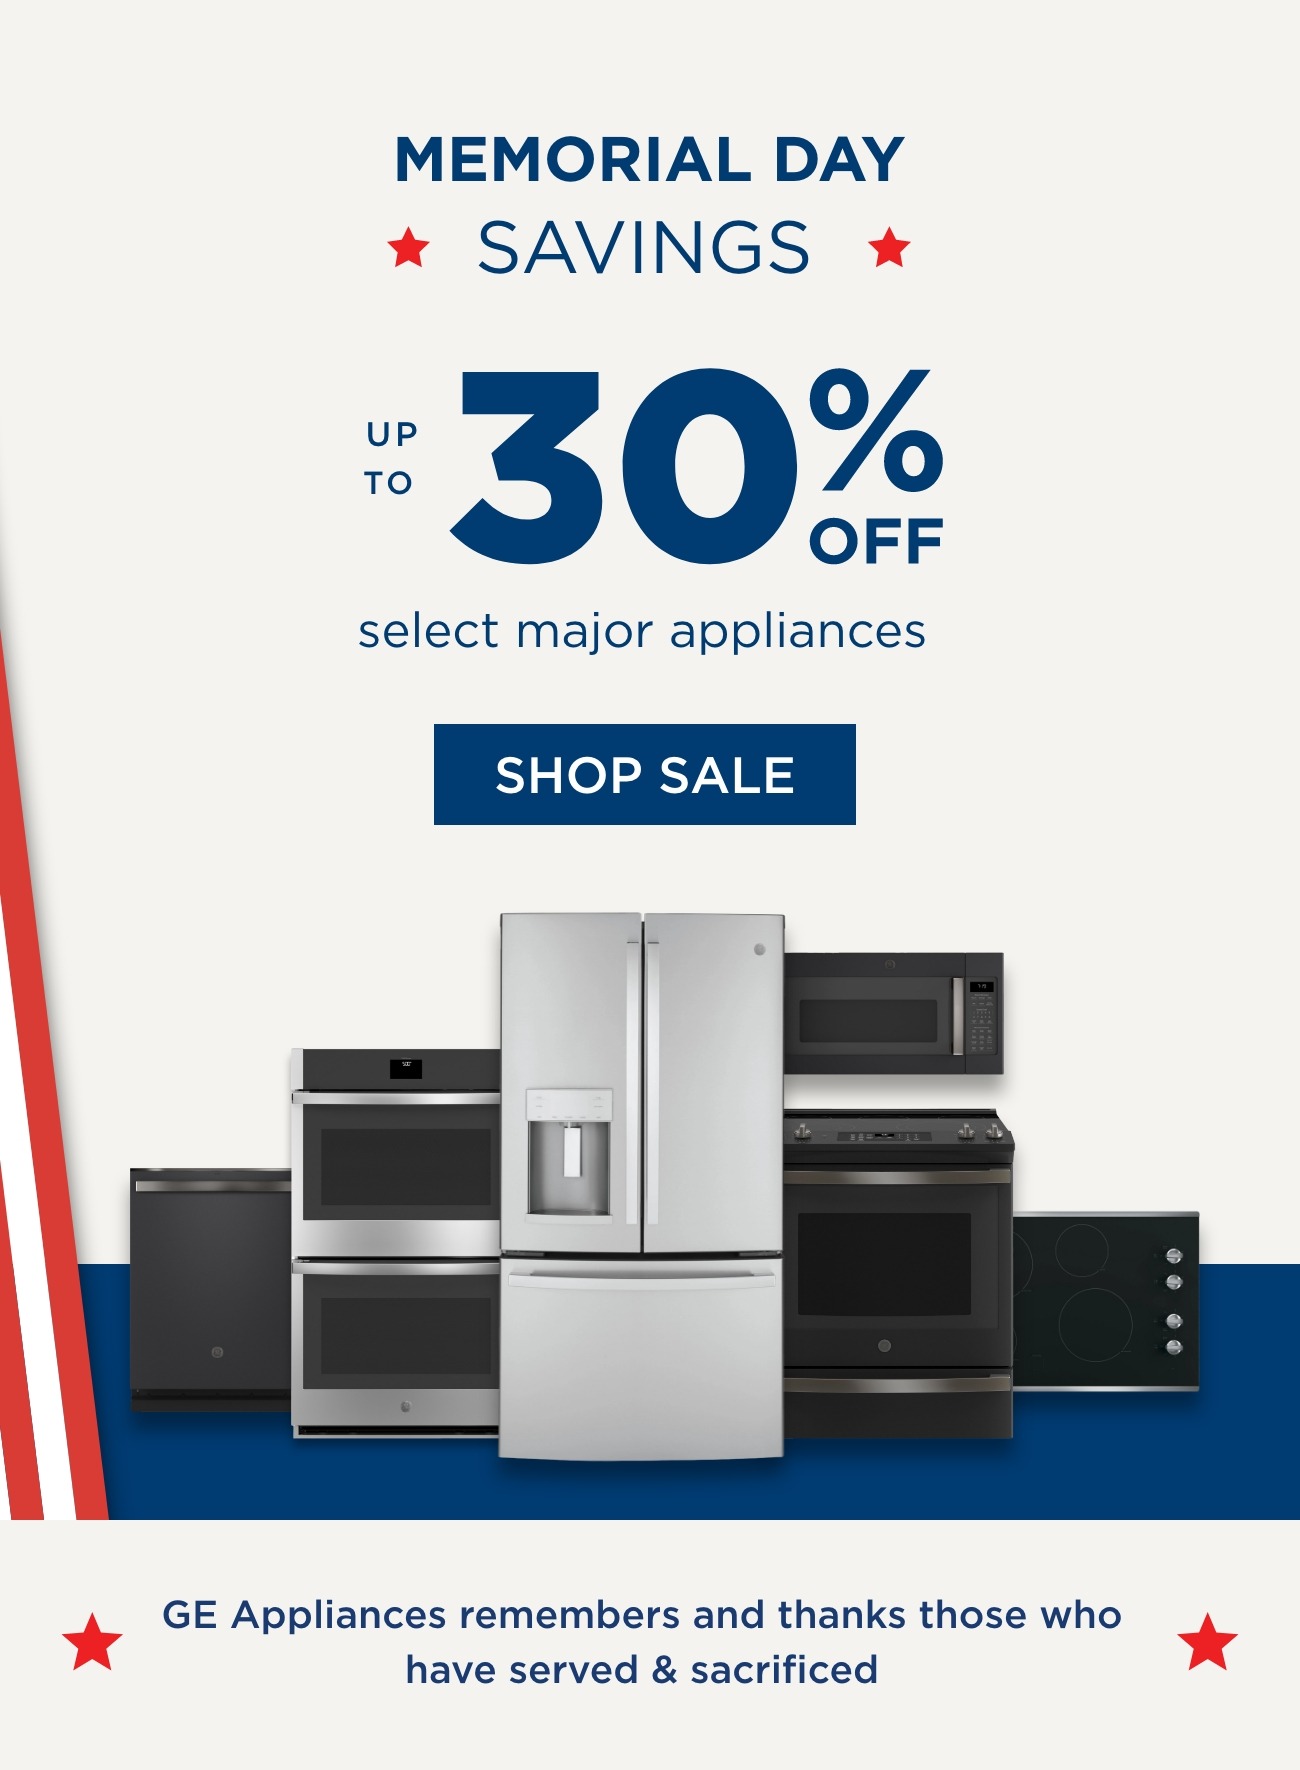 Memorial Day Savings - up to 30% OFF select major appliances